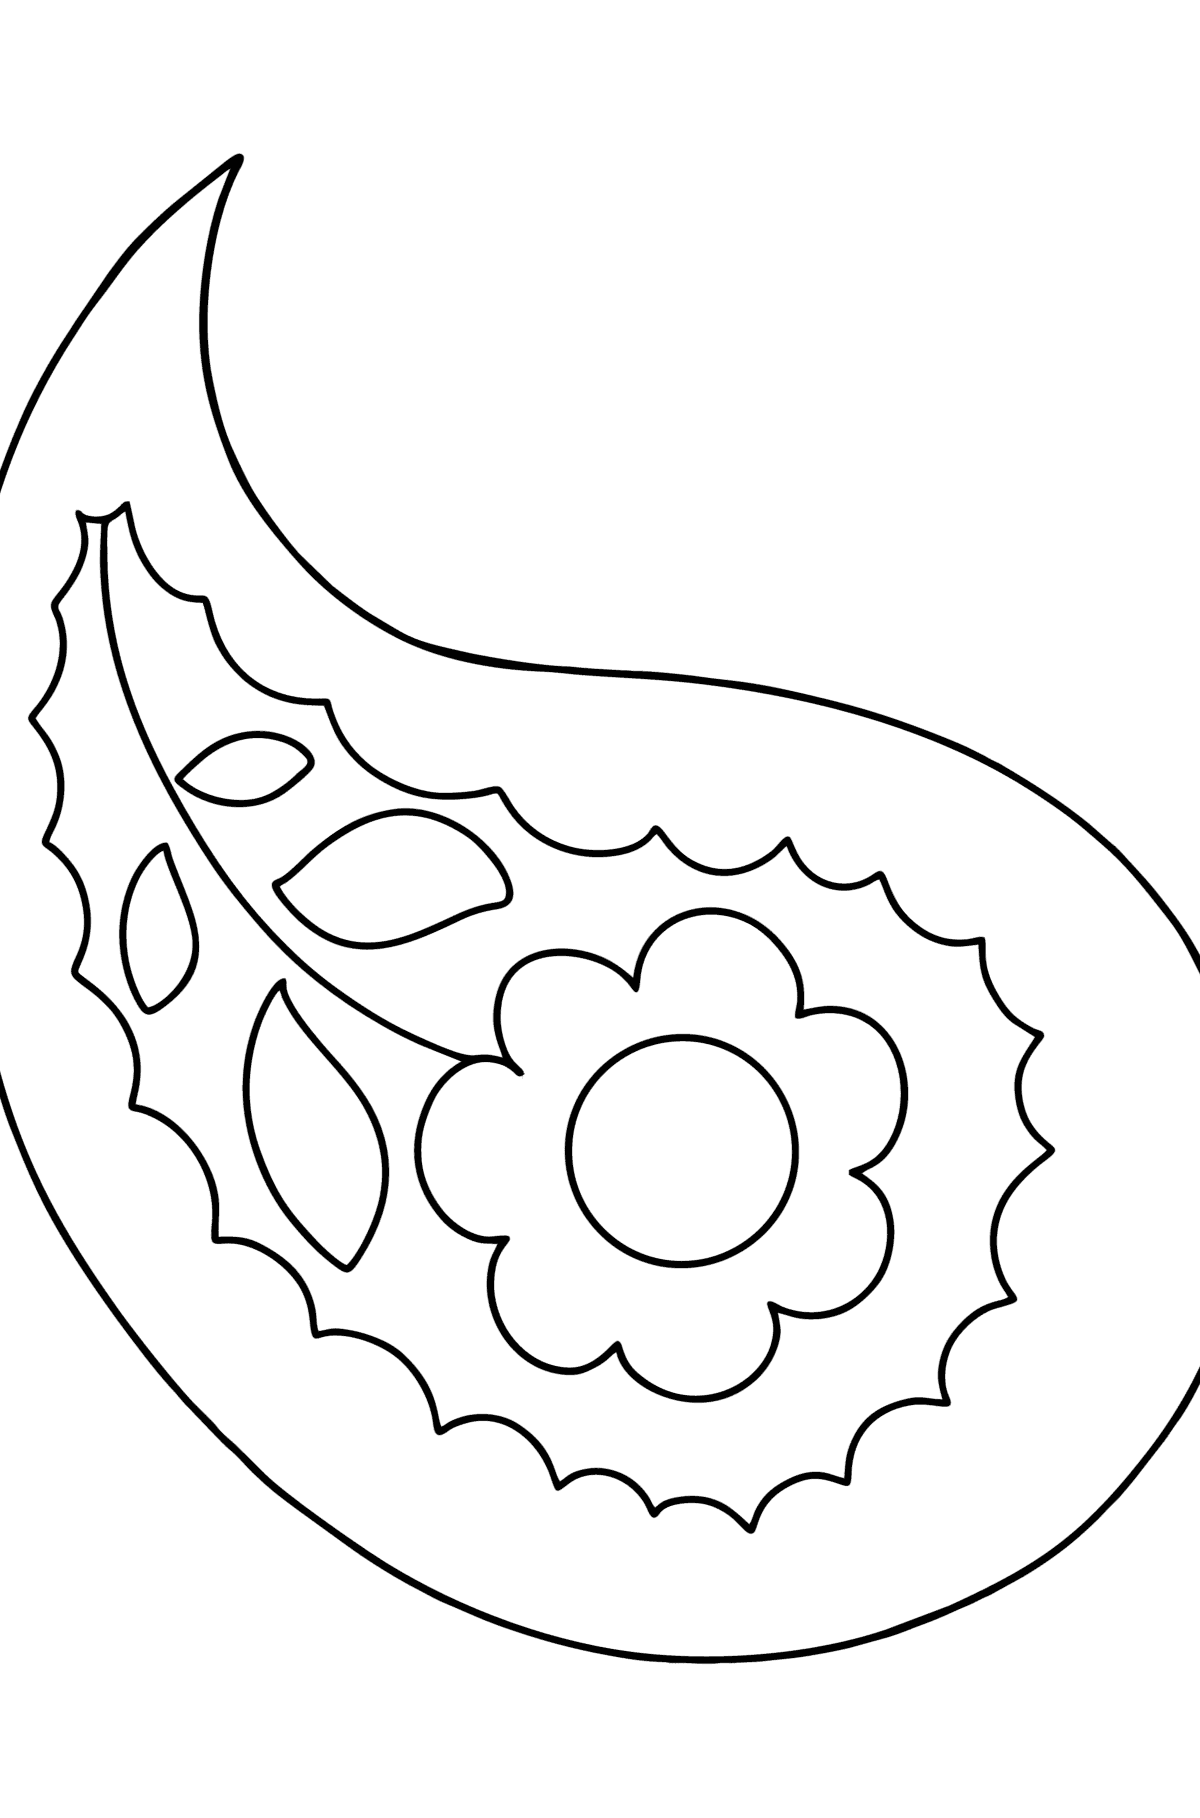 Paisley coloring page for baby - Coloring Pages for Kids